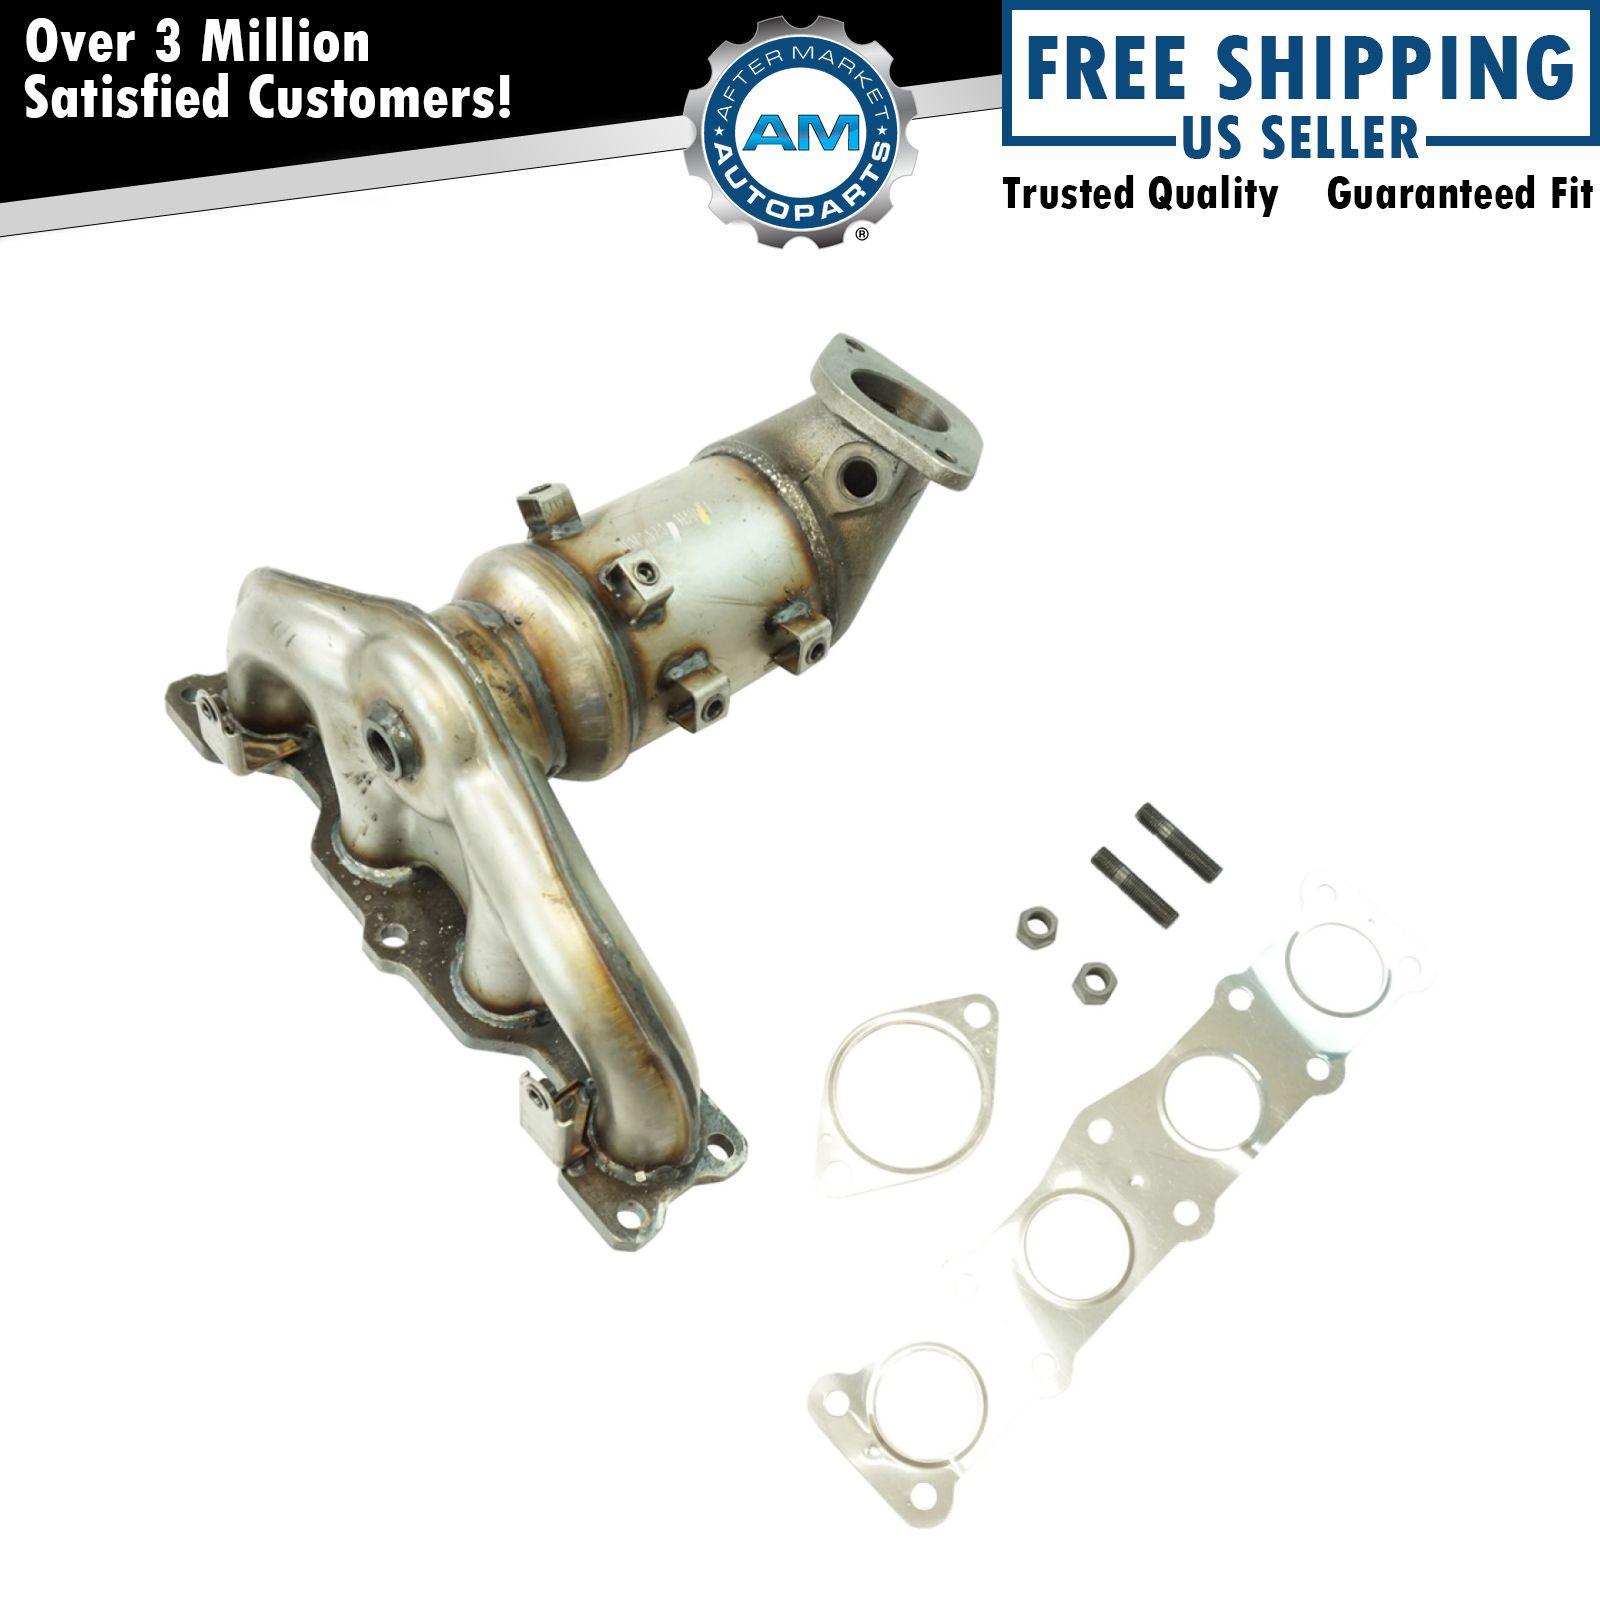 Engine Exhaust Manifold w/ Catalytic Converter Gaskets & Hardware Kit for Kia